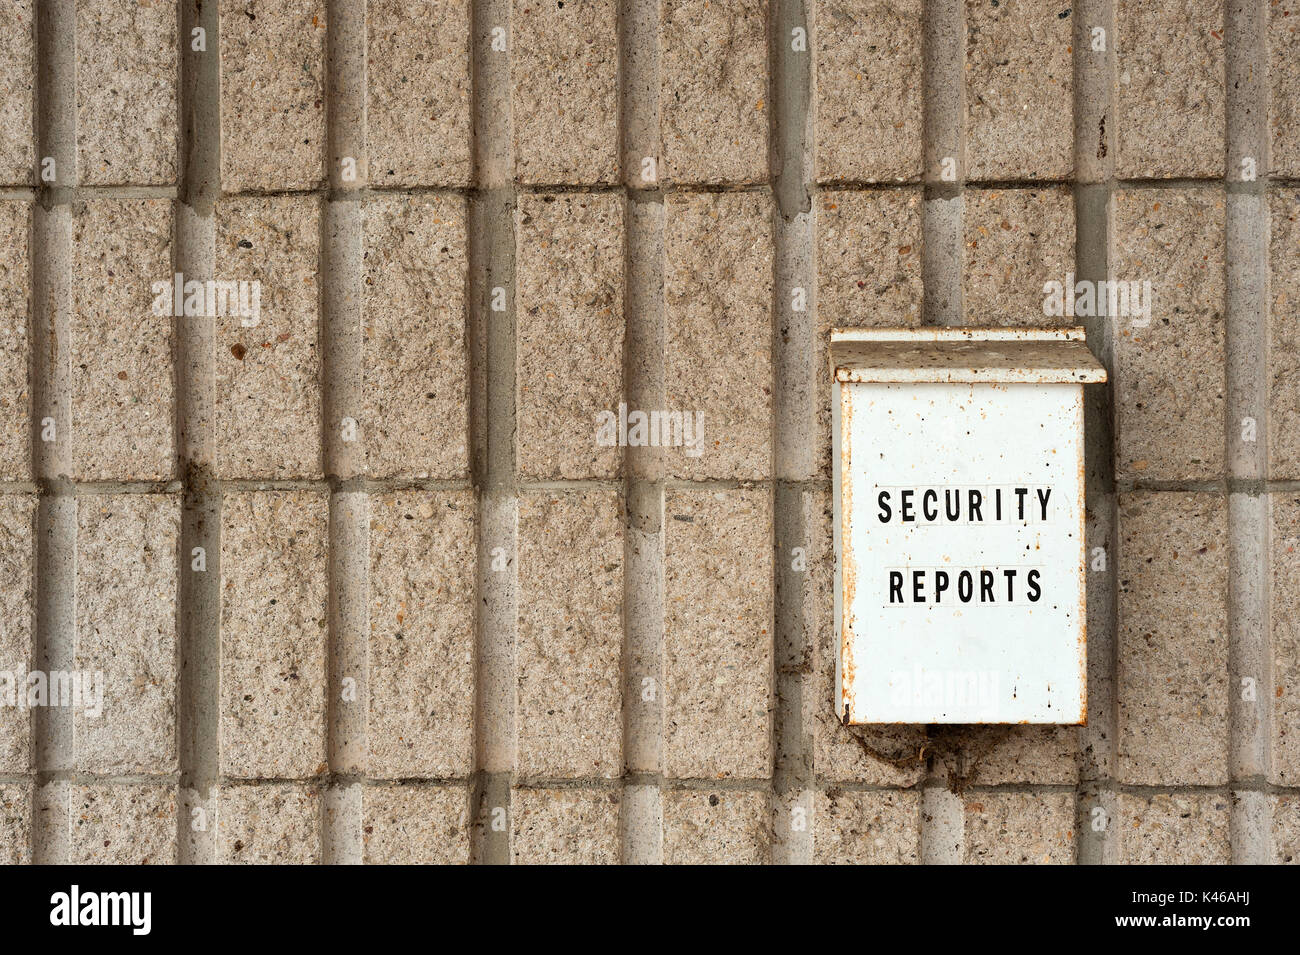 Drop box for security reports Stock Photo